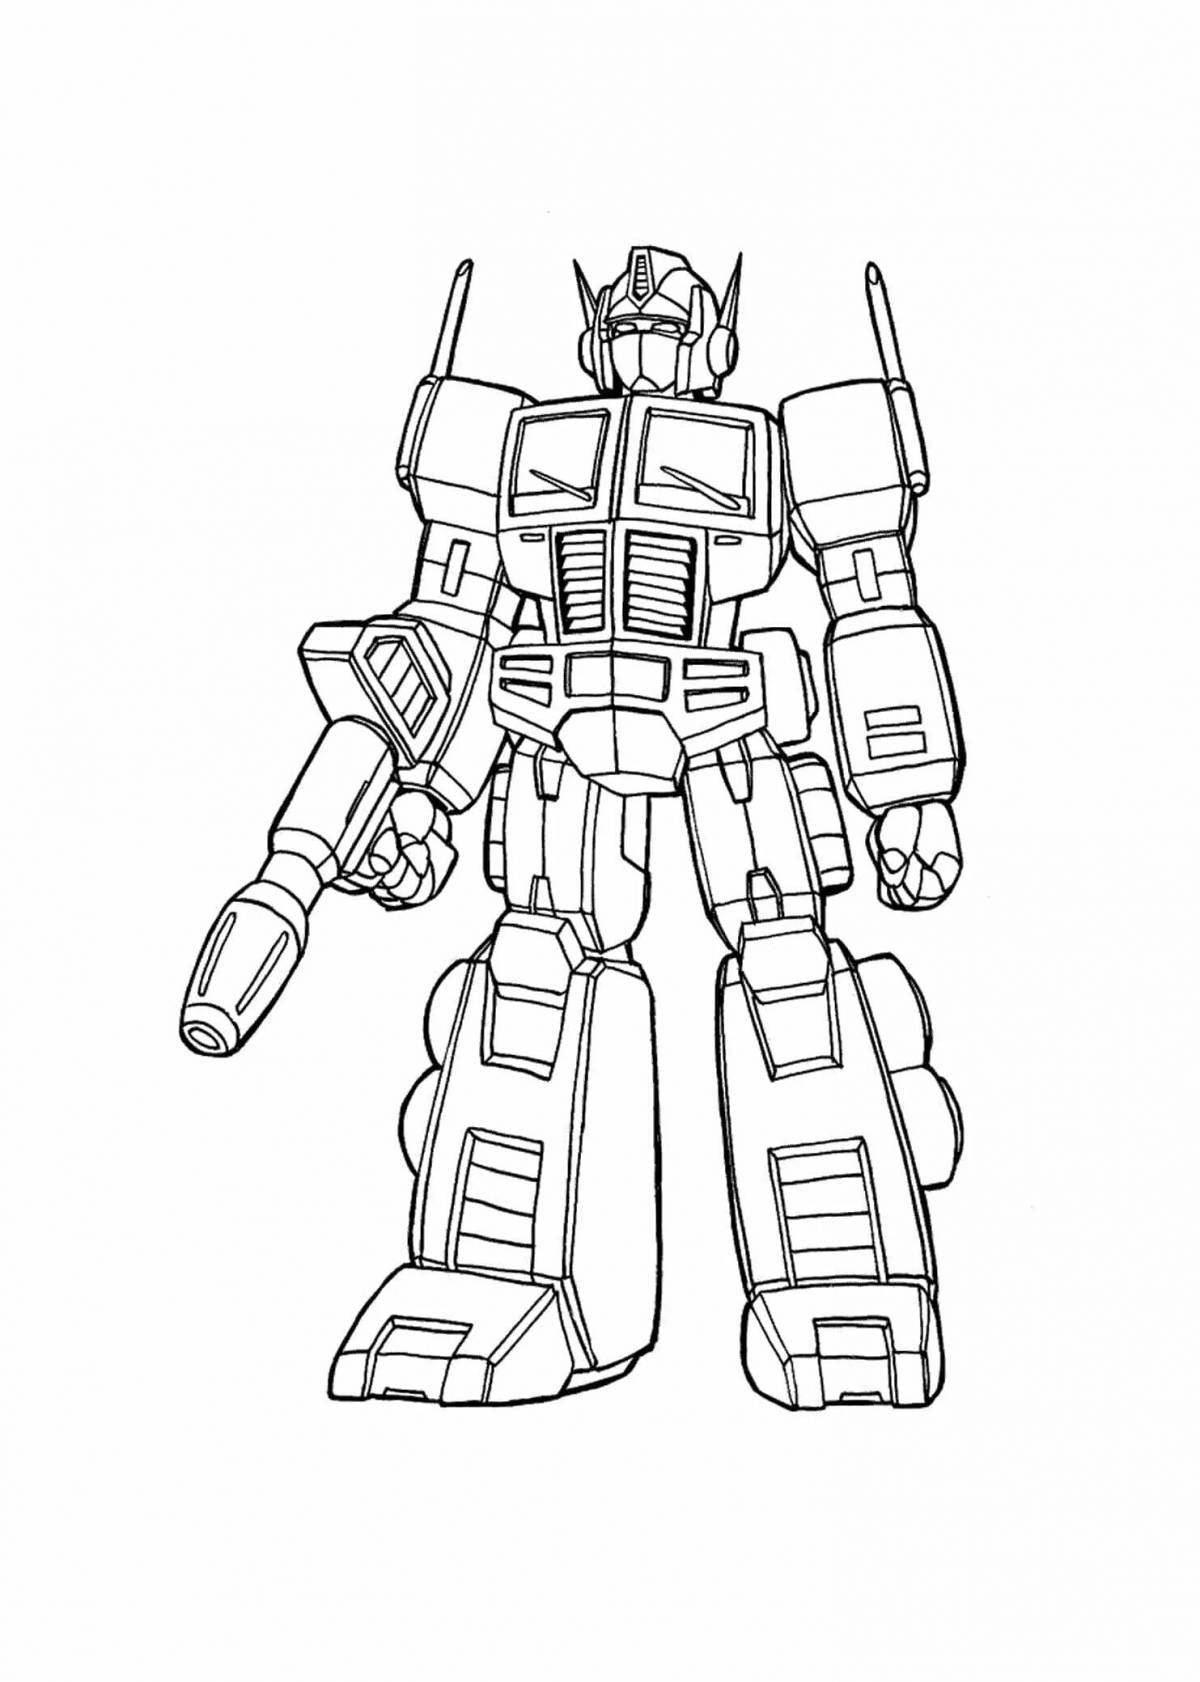 Fun coloring pages of transforming robots for boys